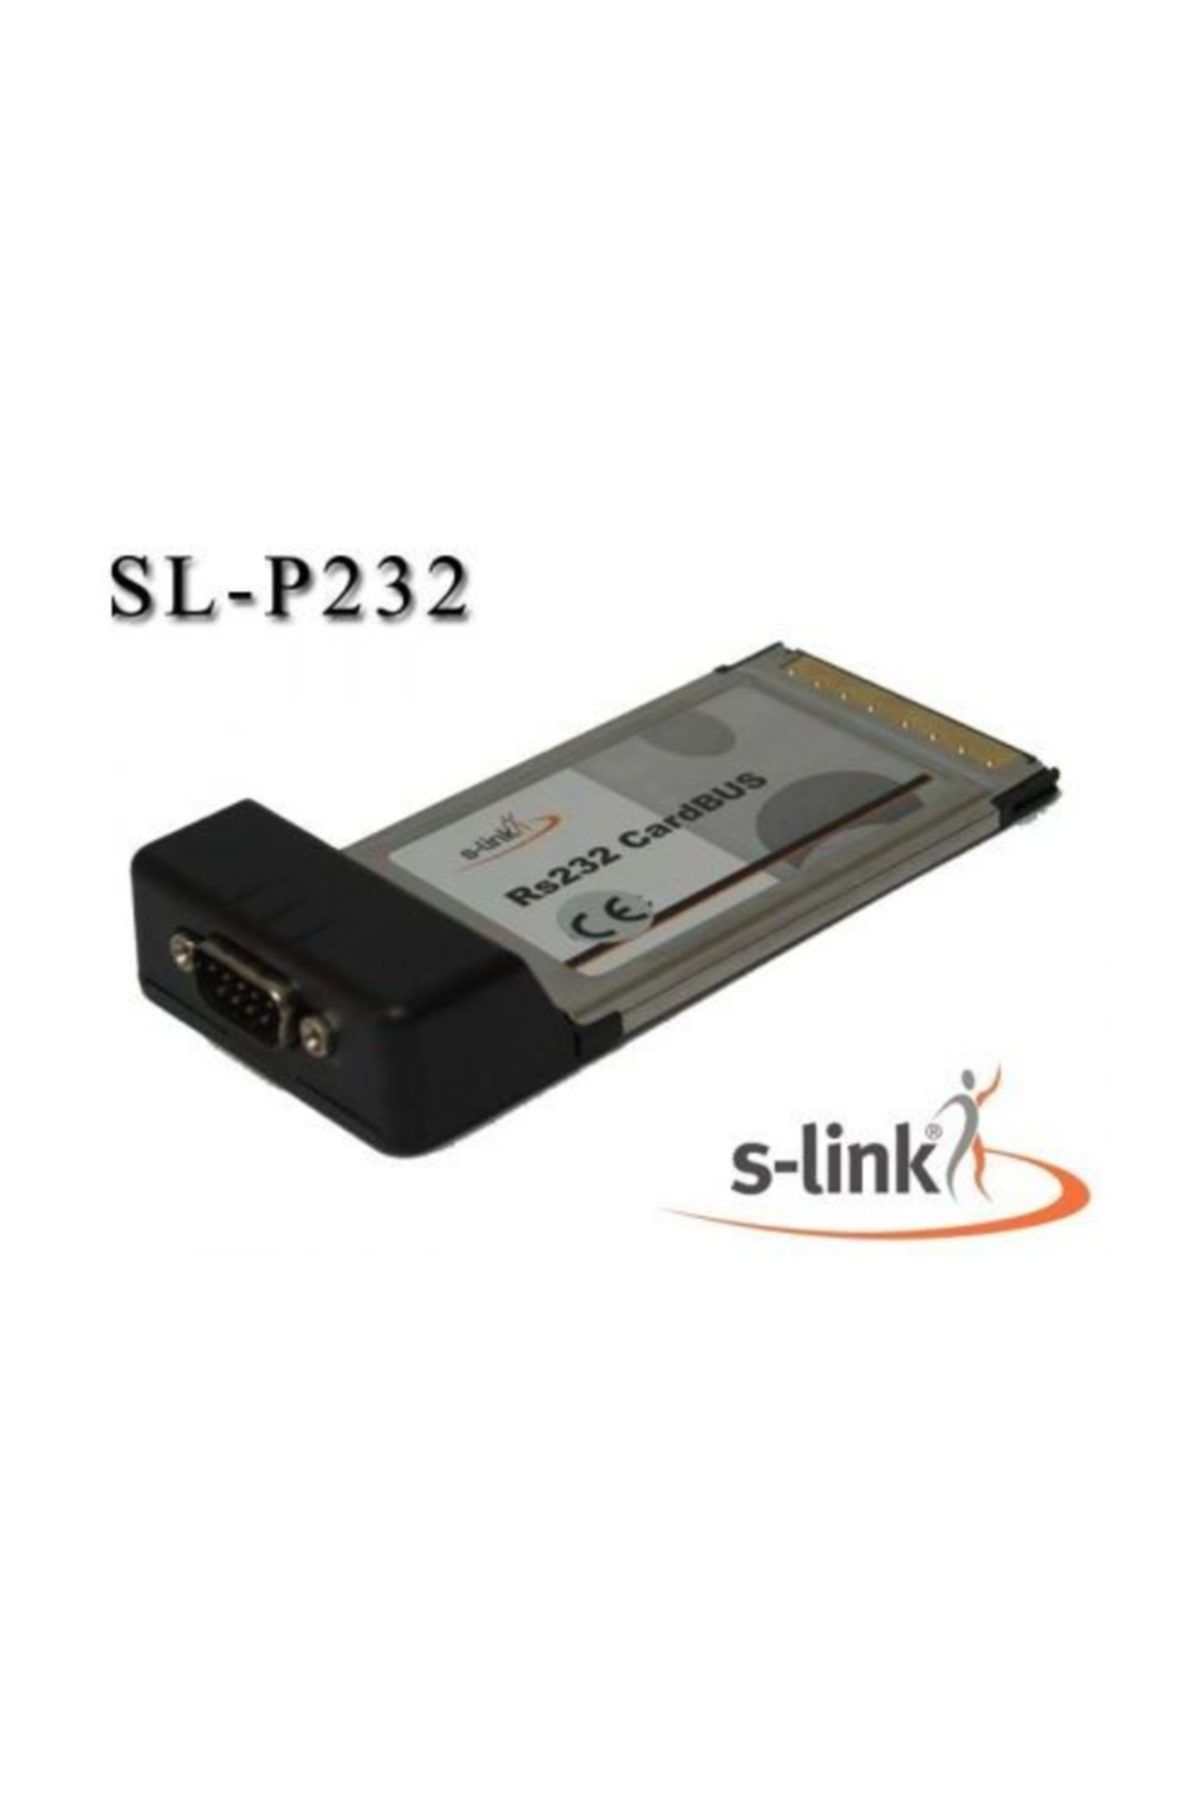 S-Link Sl-P232 Pcmci Pcmci To Rs-232 Kart